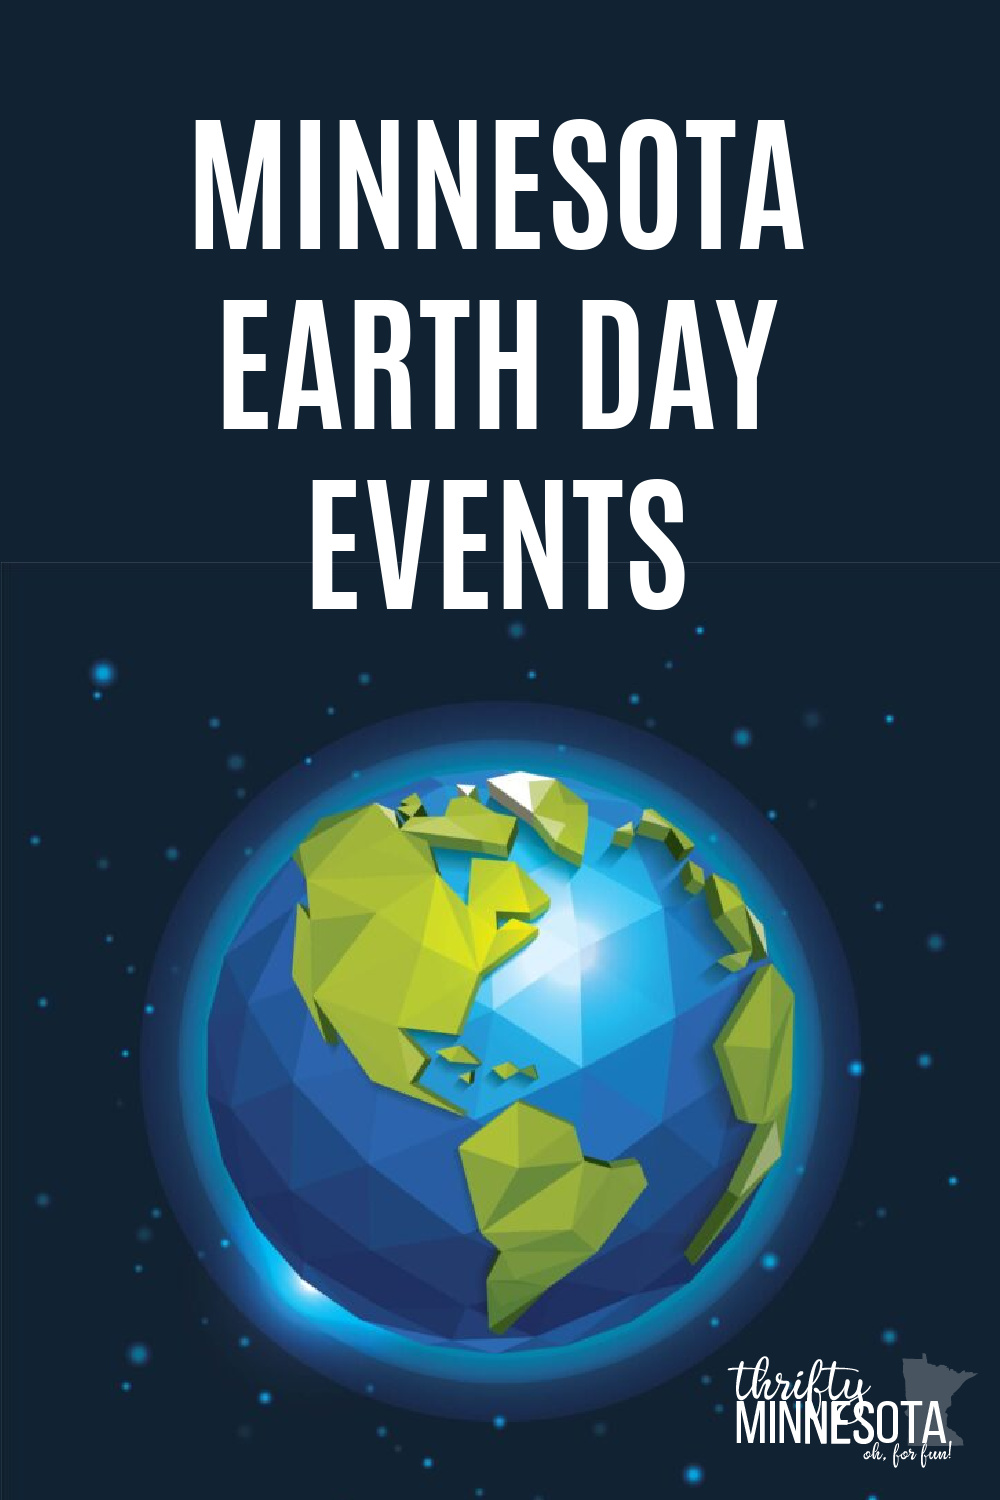 MINNESOTA EARTH DAY EVENTS.